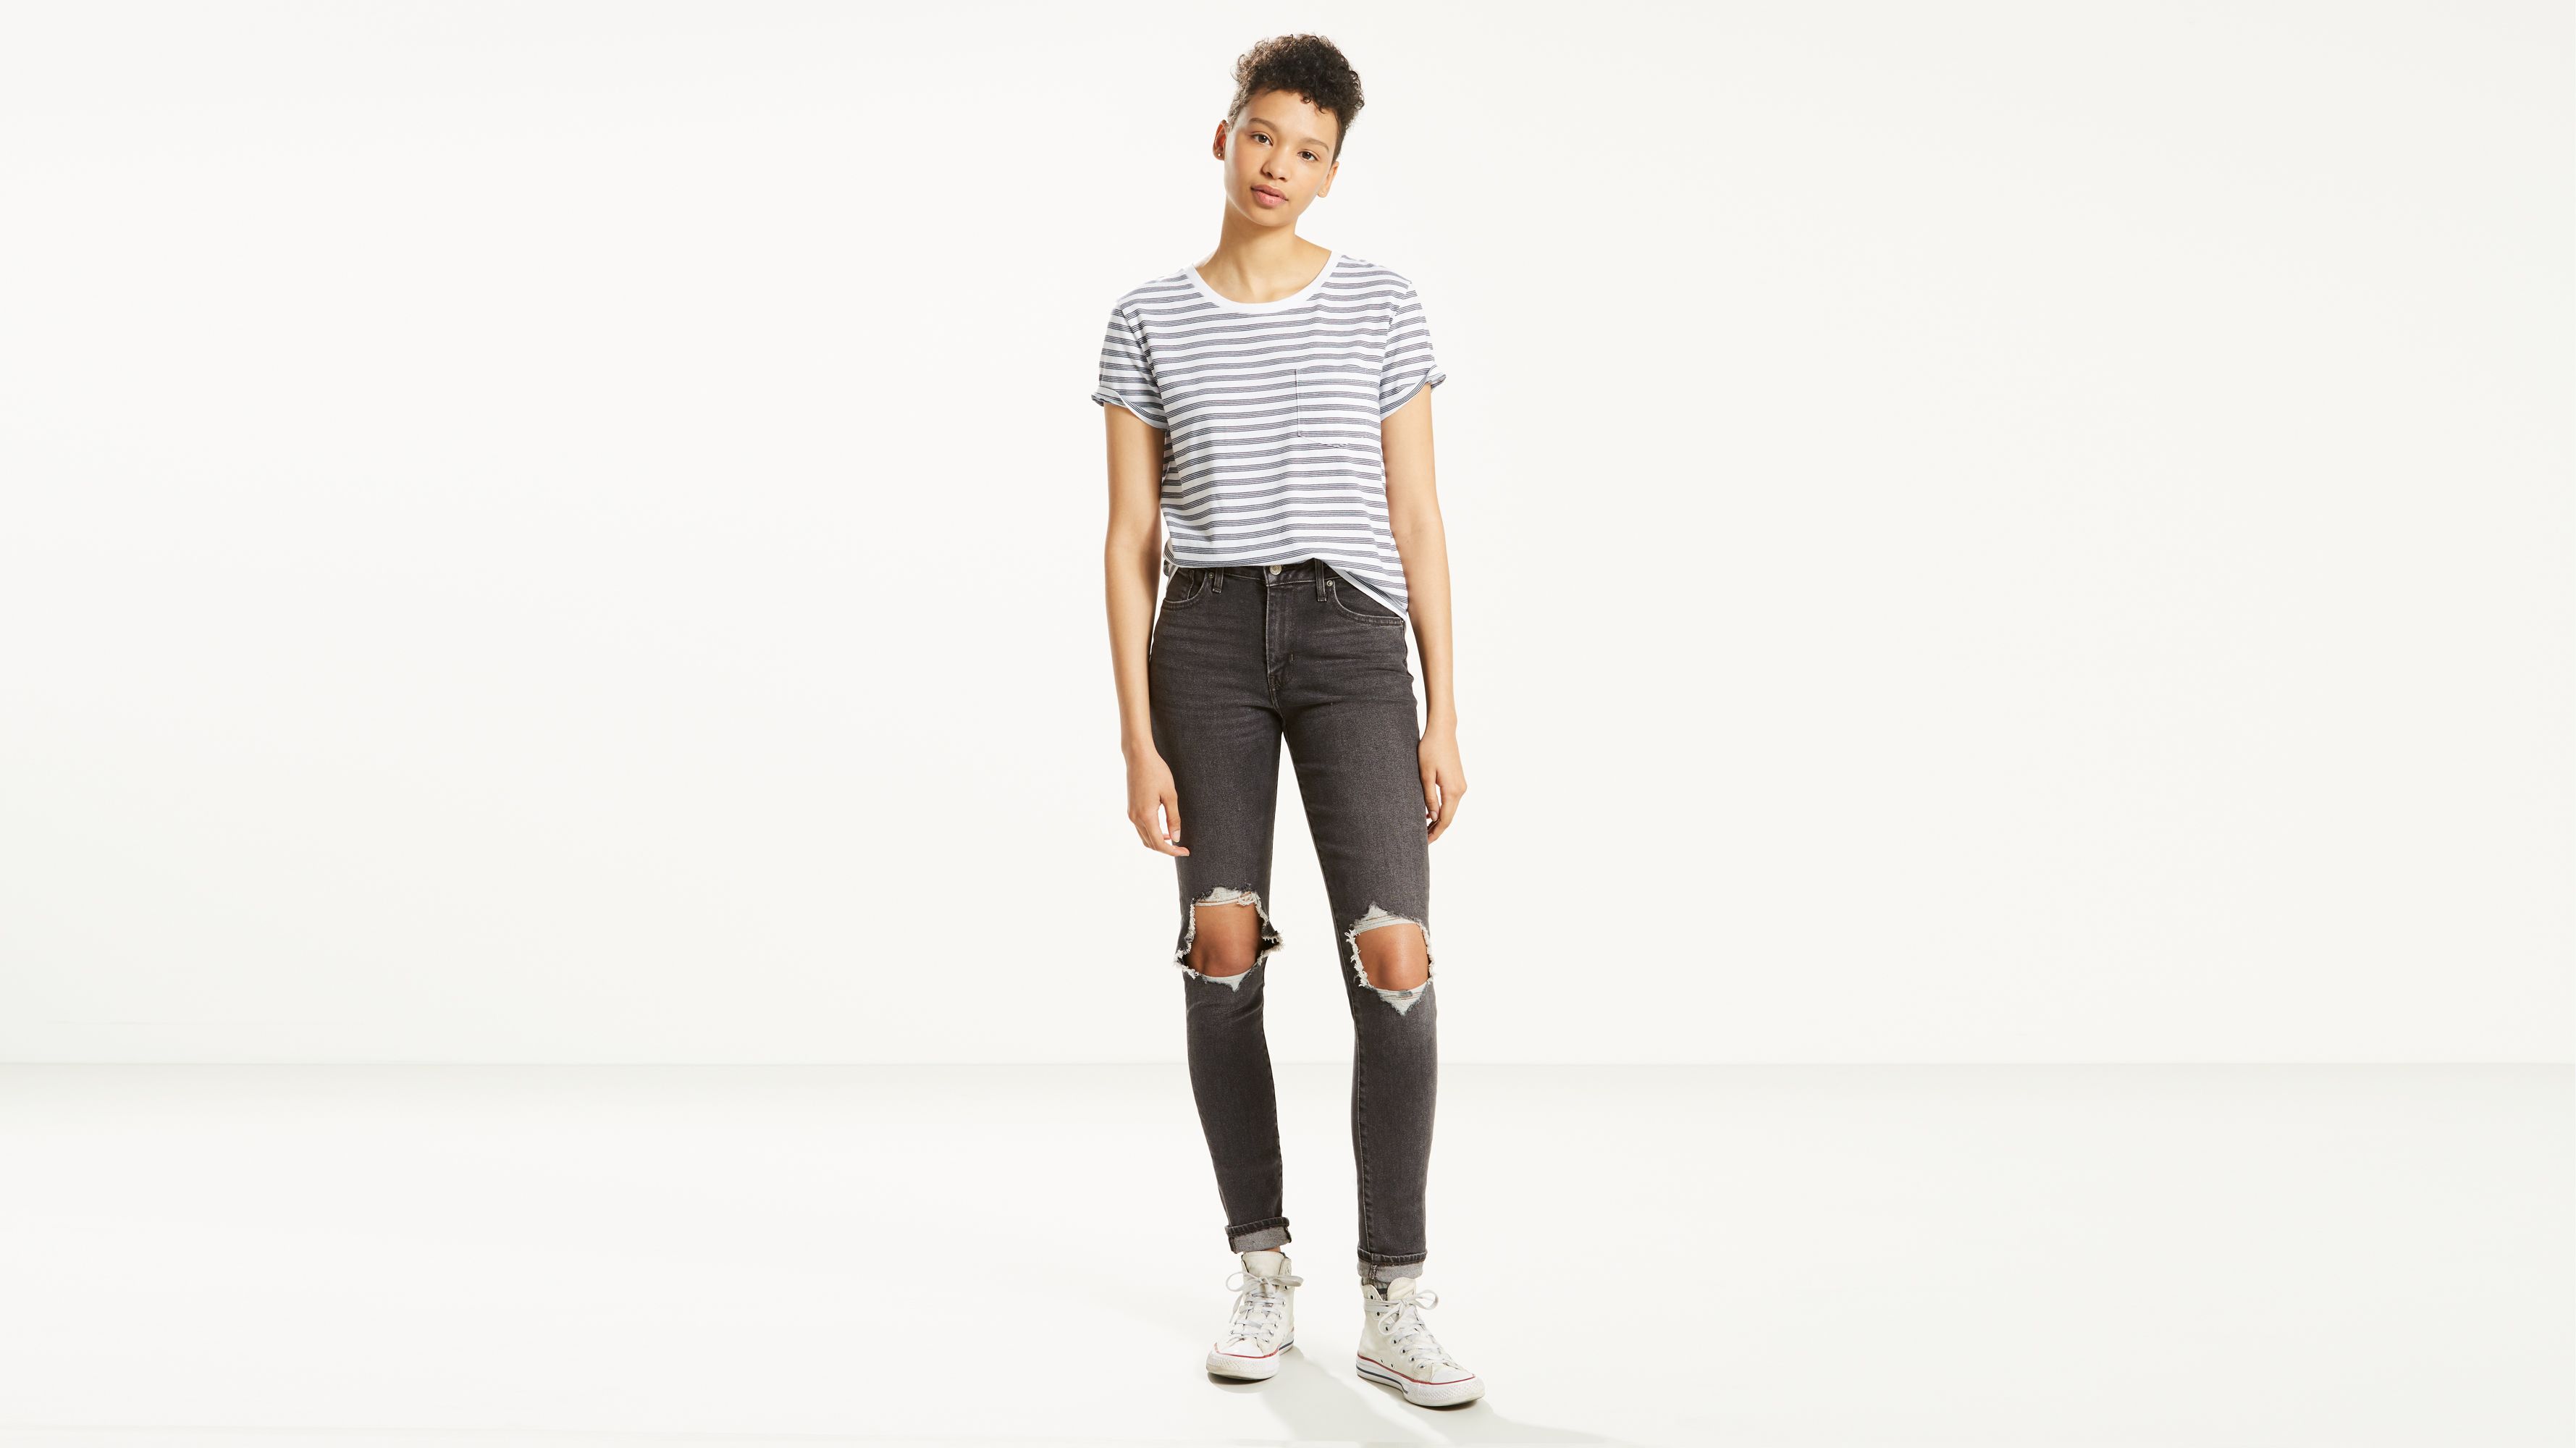 levis black ripped jeans womens